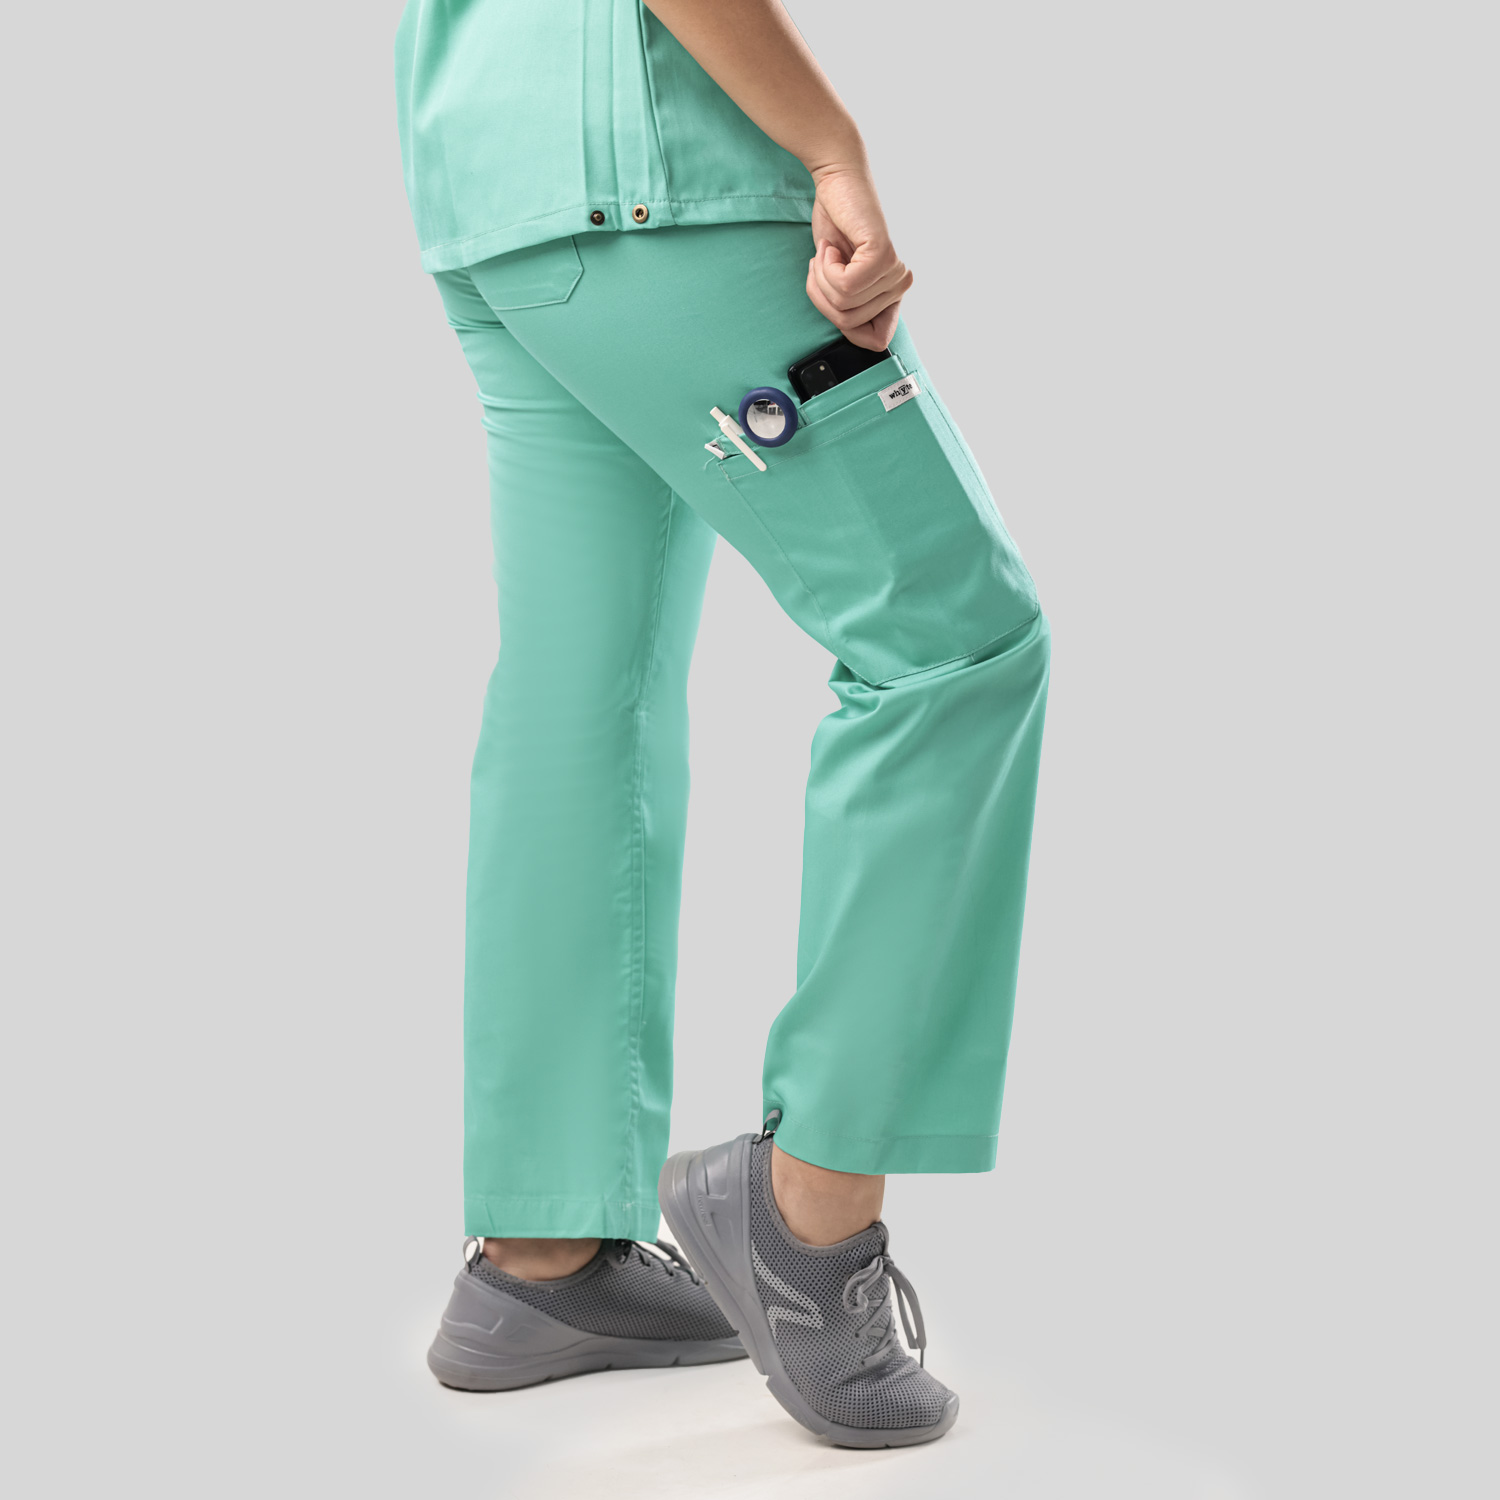 classic edition-2.0- mint green- pant-3 pockets